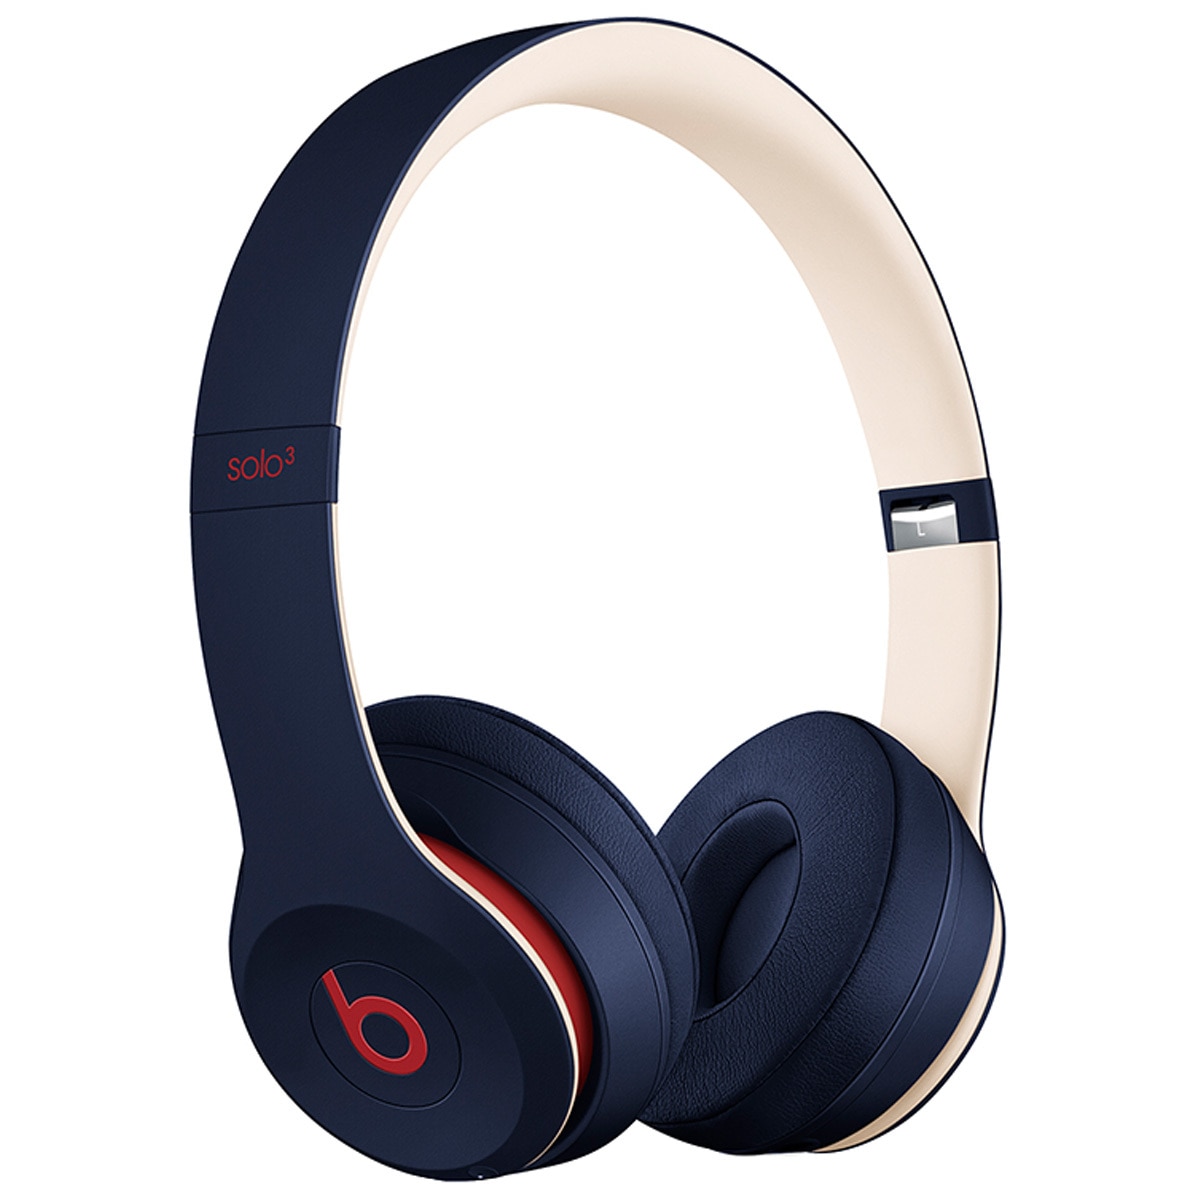 how much are the beats solo 3 wireless